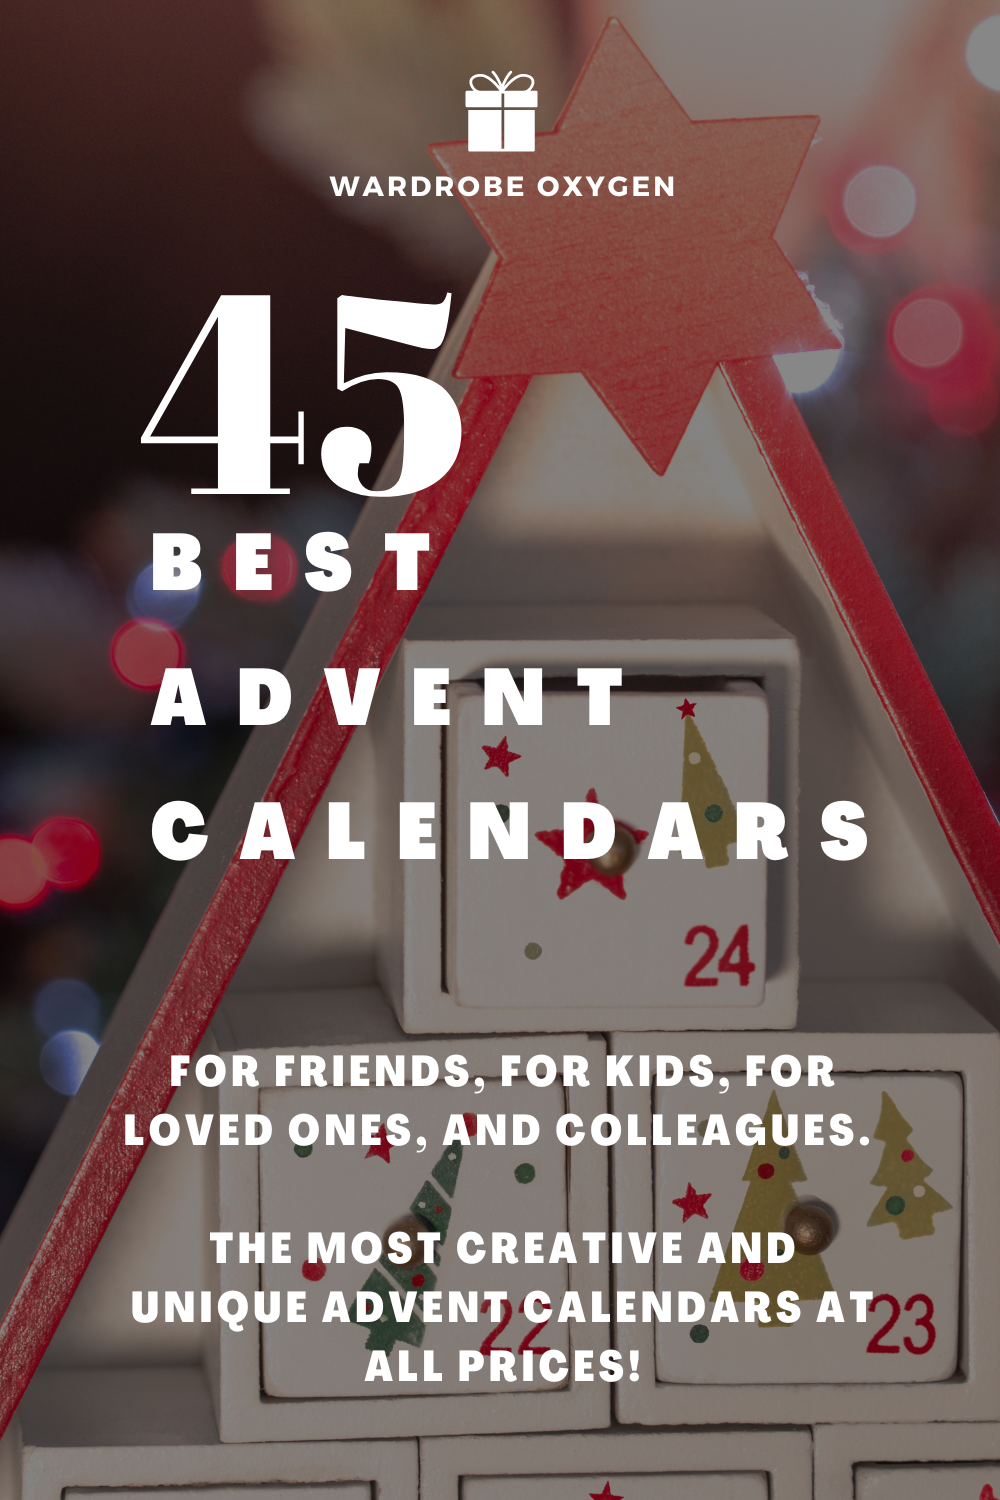 The 45 Best Advent Calendars for 2022